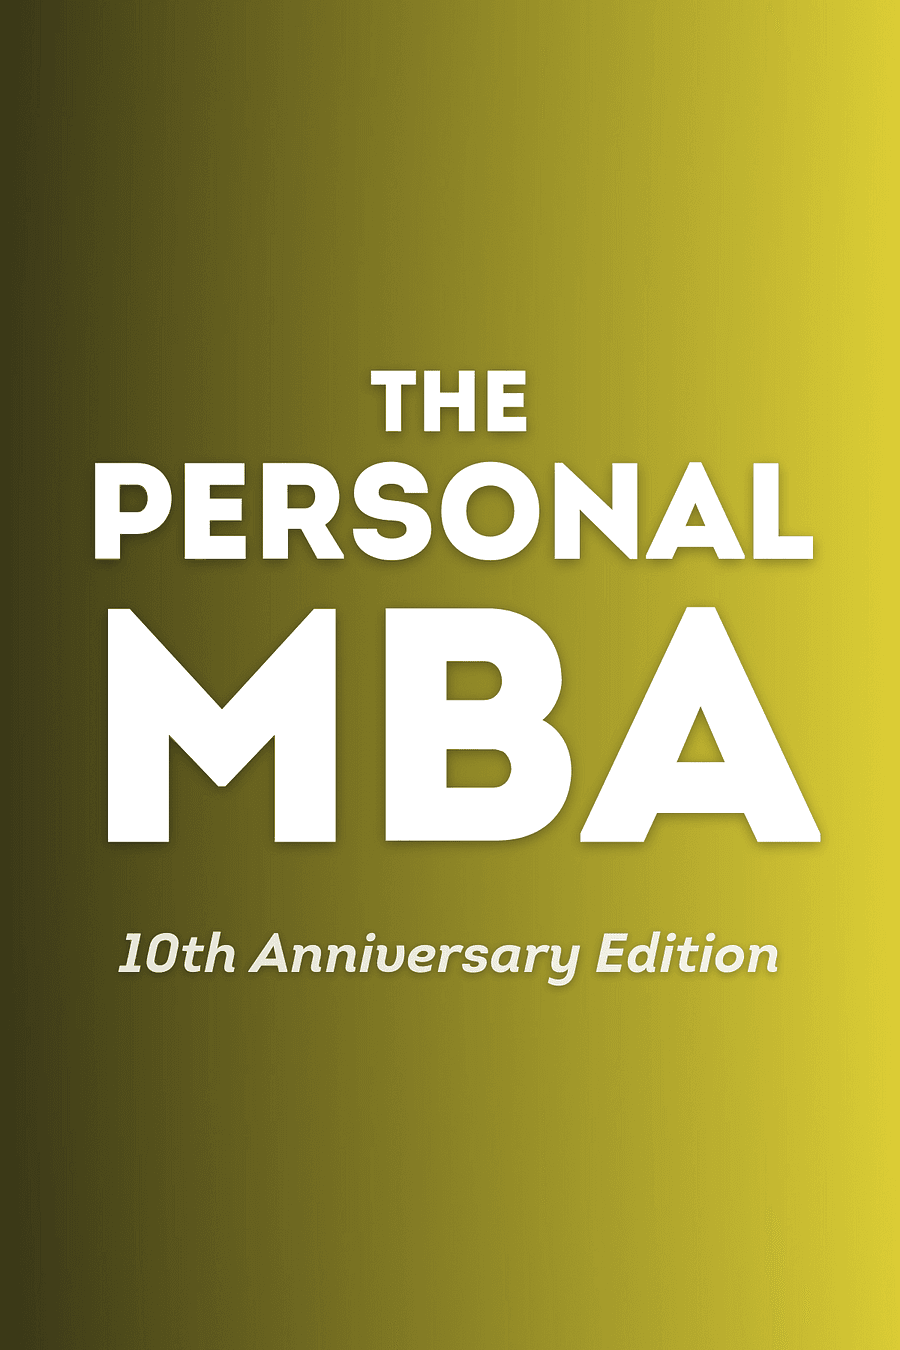 The Personal MBA 10th Anniversary Edition by Josh Kaufman - Book Summary